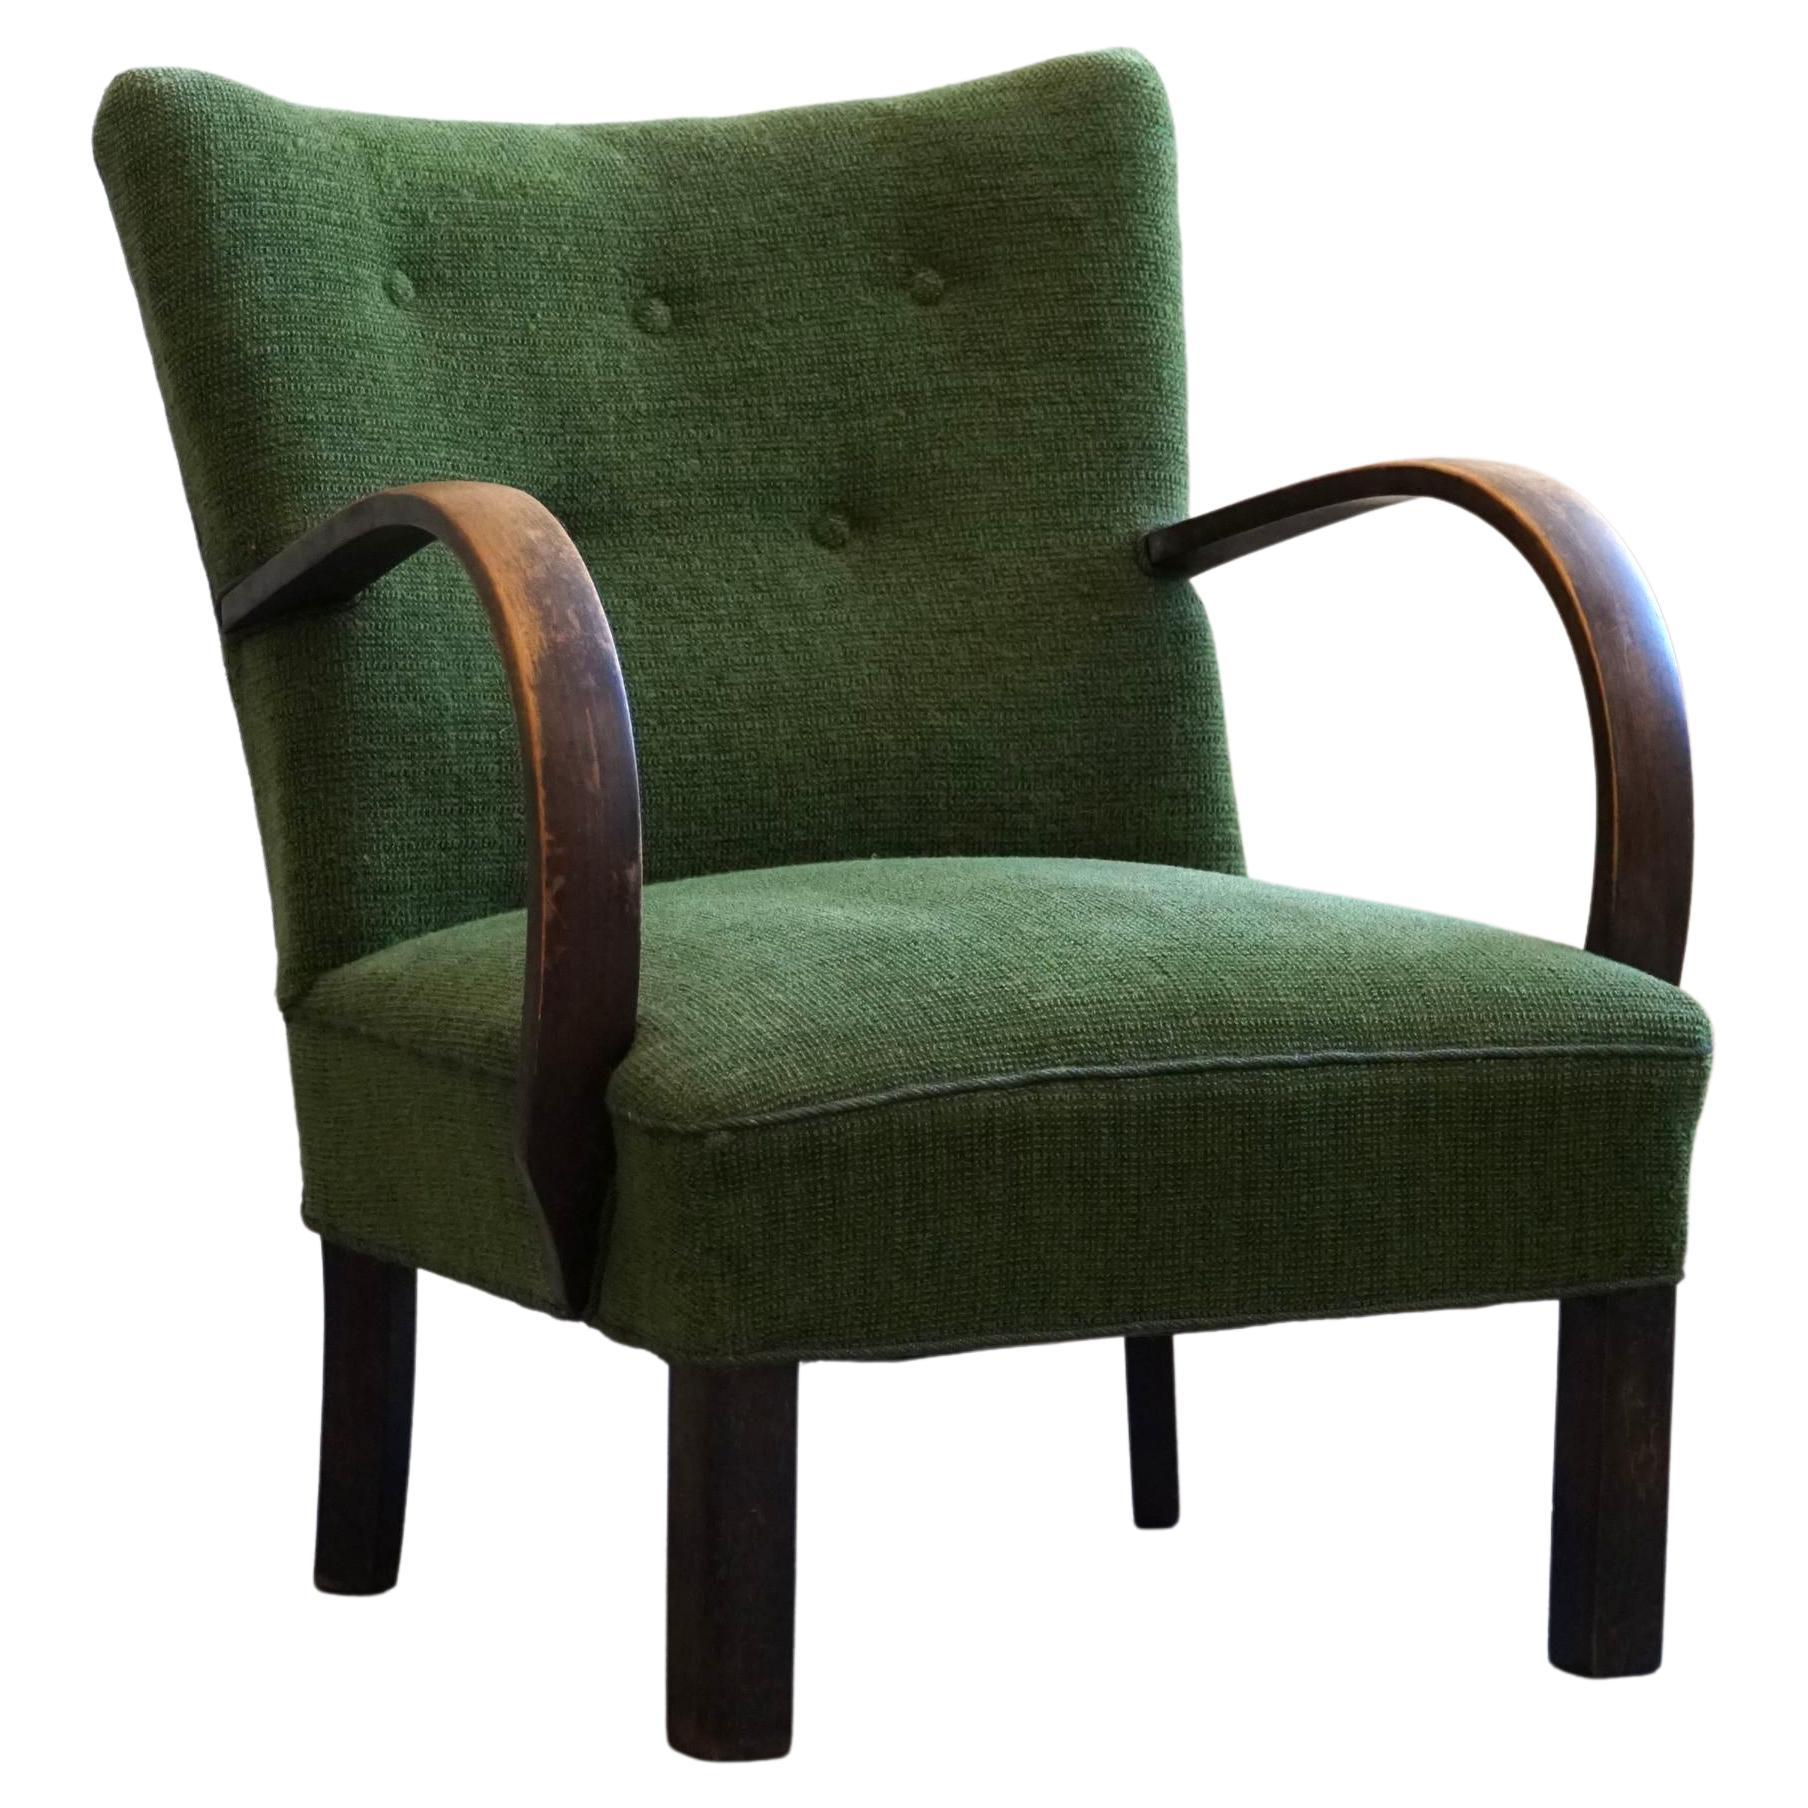 Mid Century Modern Easy Chair in Beech & Green Fabric, Danish Cabinetmaker, 1940 For Sale